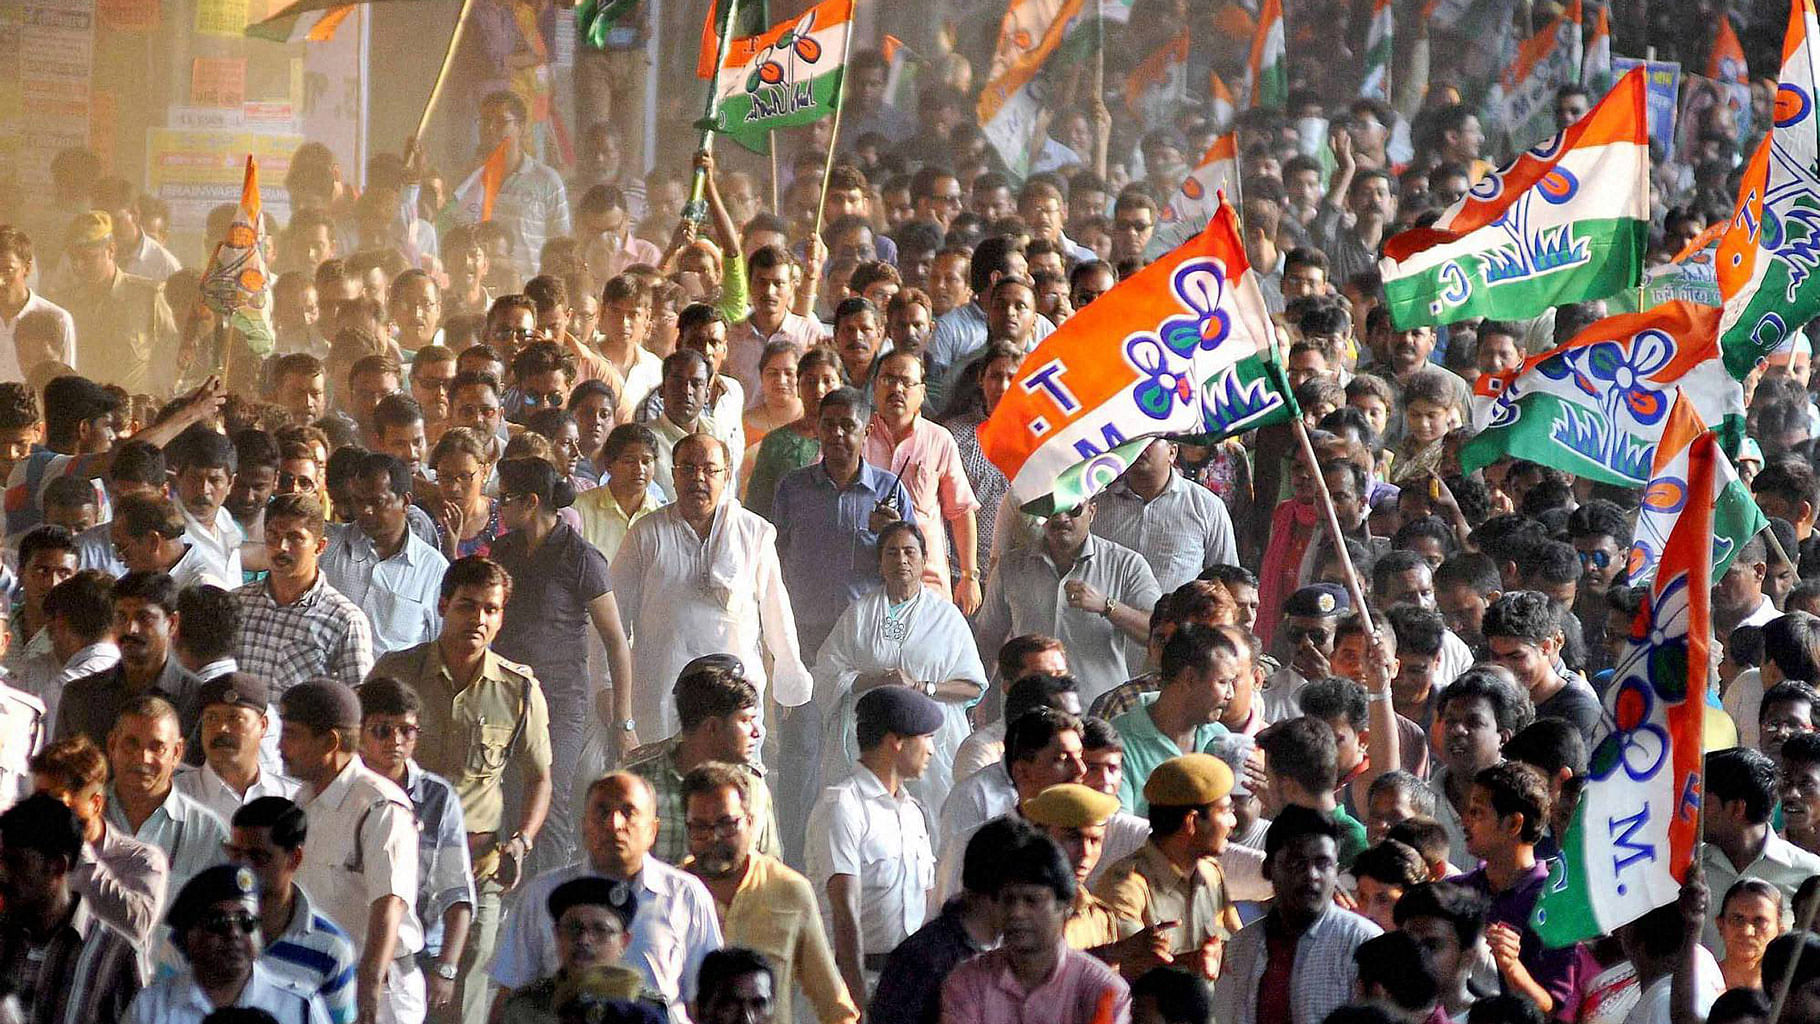 West Bengal Chief Minister and Trinamool Congress chief  Mamata Banerjee campaigning for her party in Kolkata.